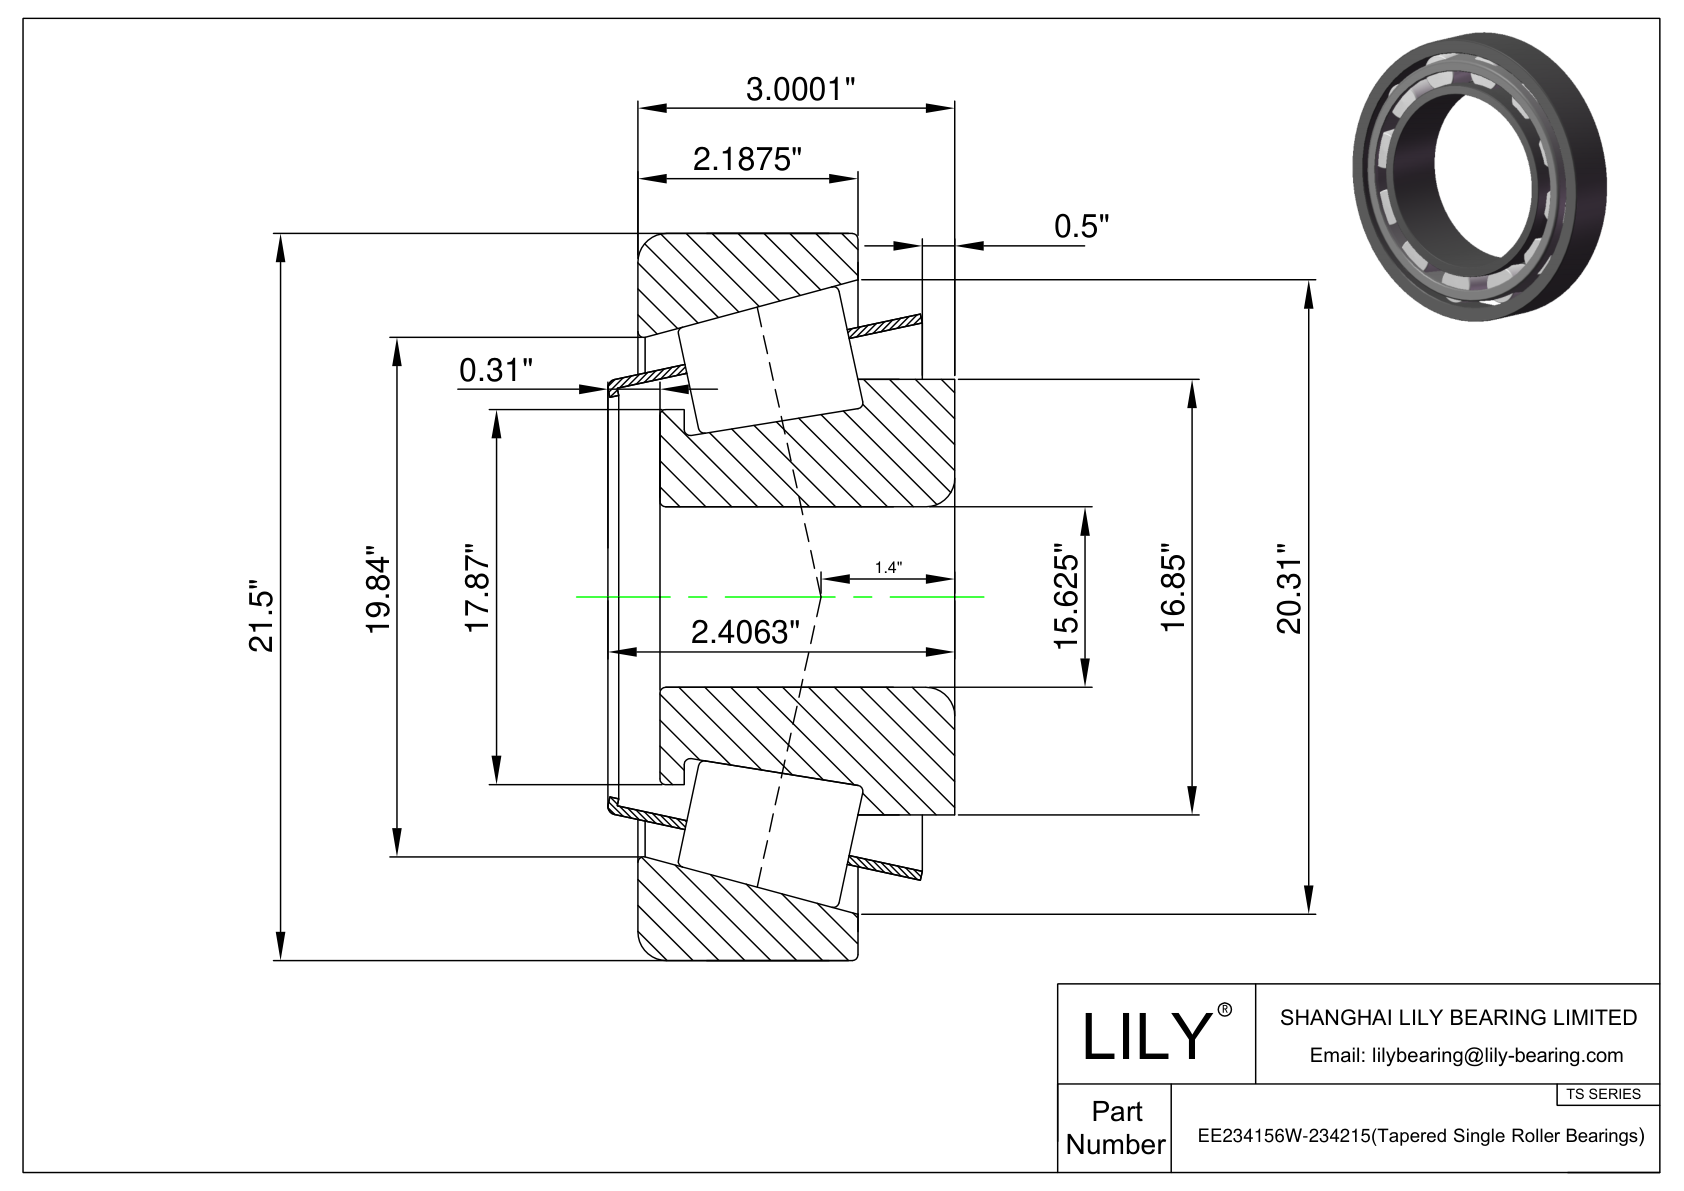 EE234156W-234215 TS (Tapered Single Roller Bearings) (Imperial) cad drawing